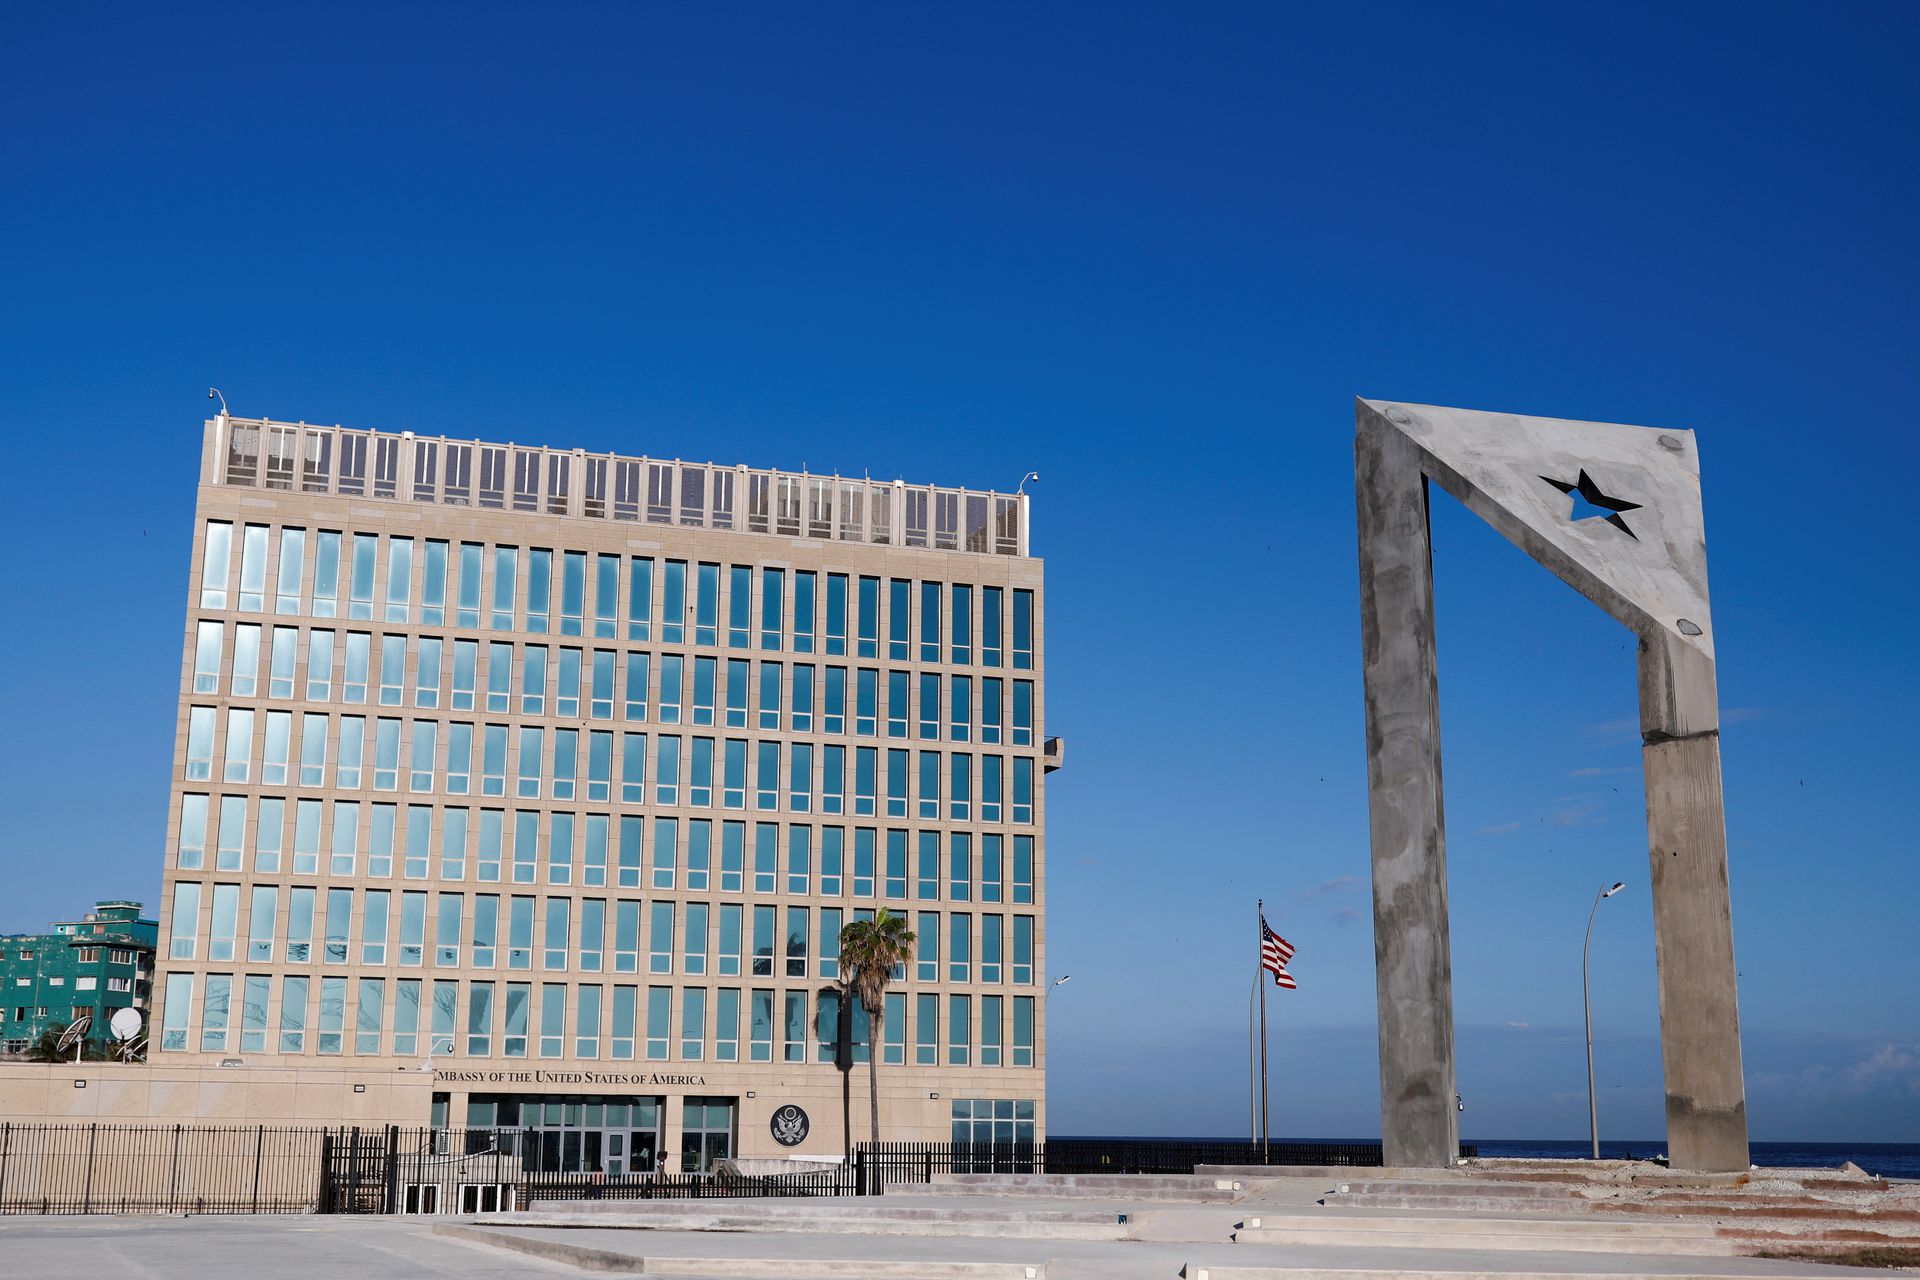 The United States embassy is seen in Havana, Cuba, March 3, 2022